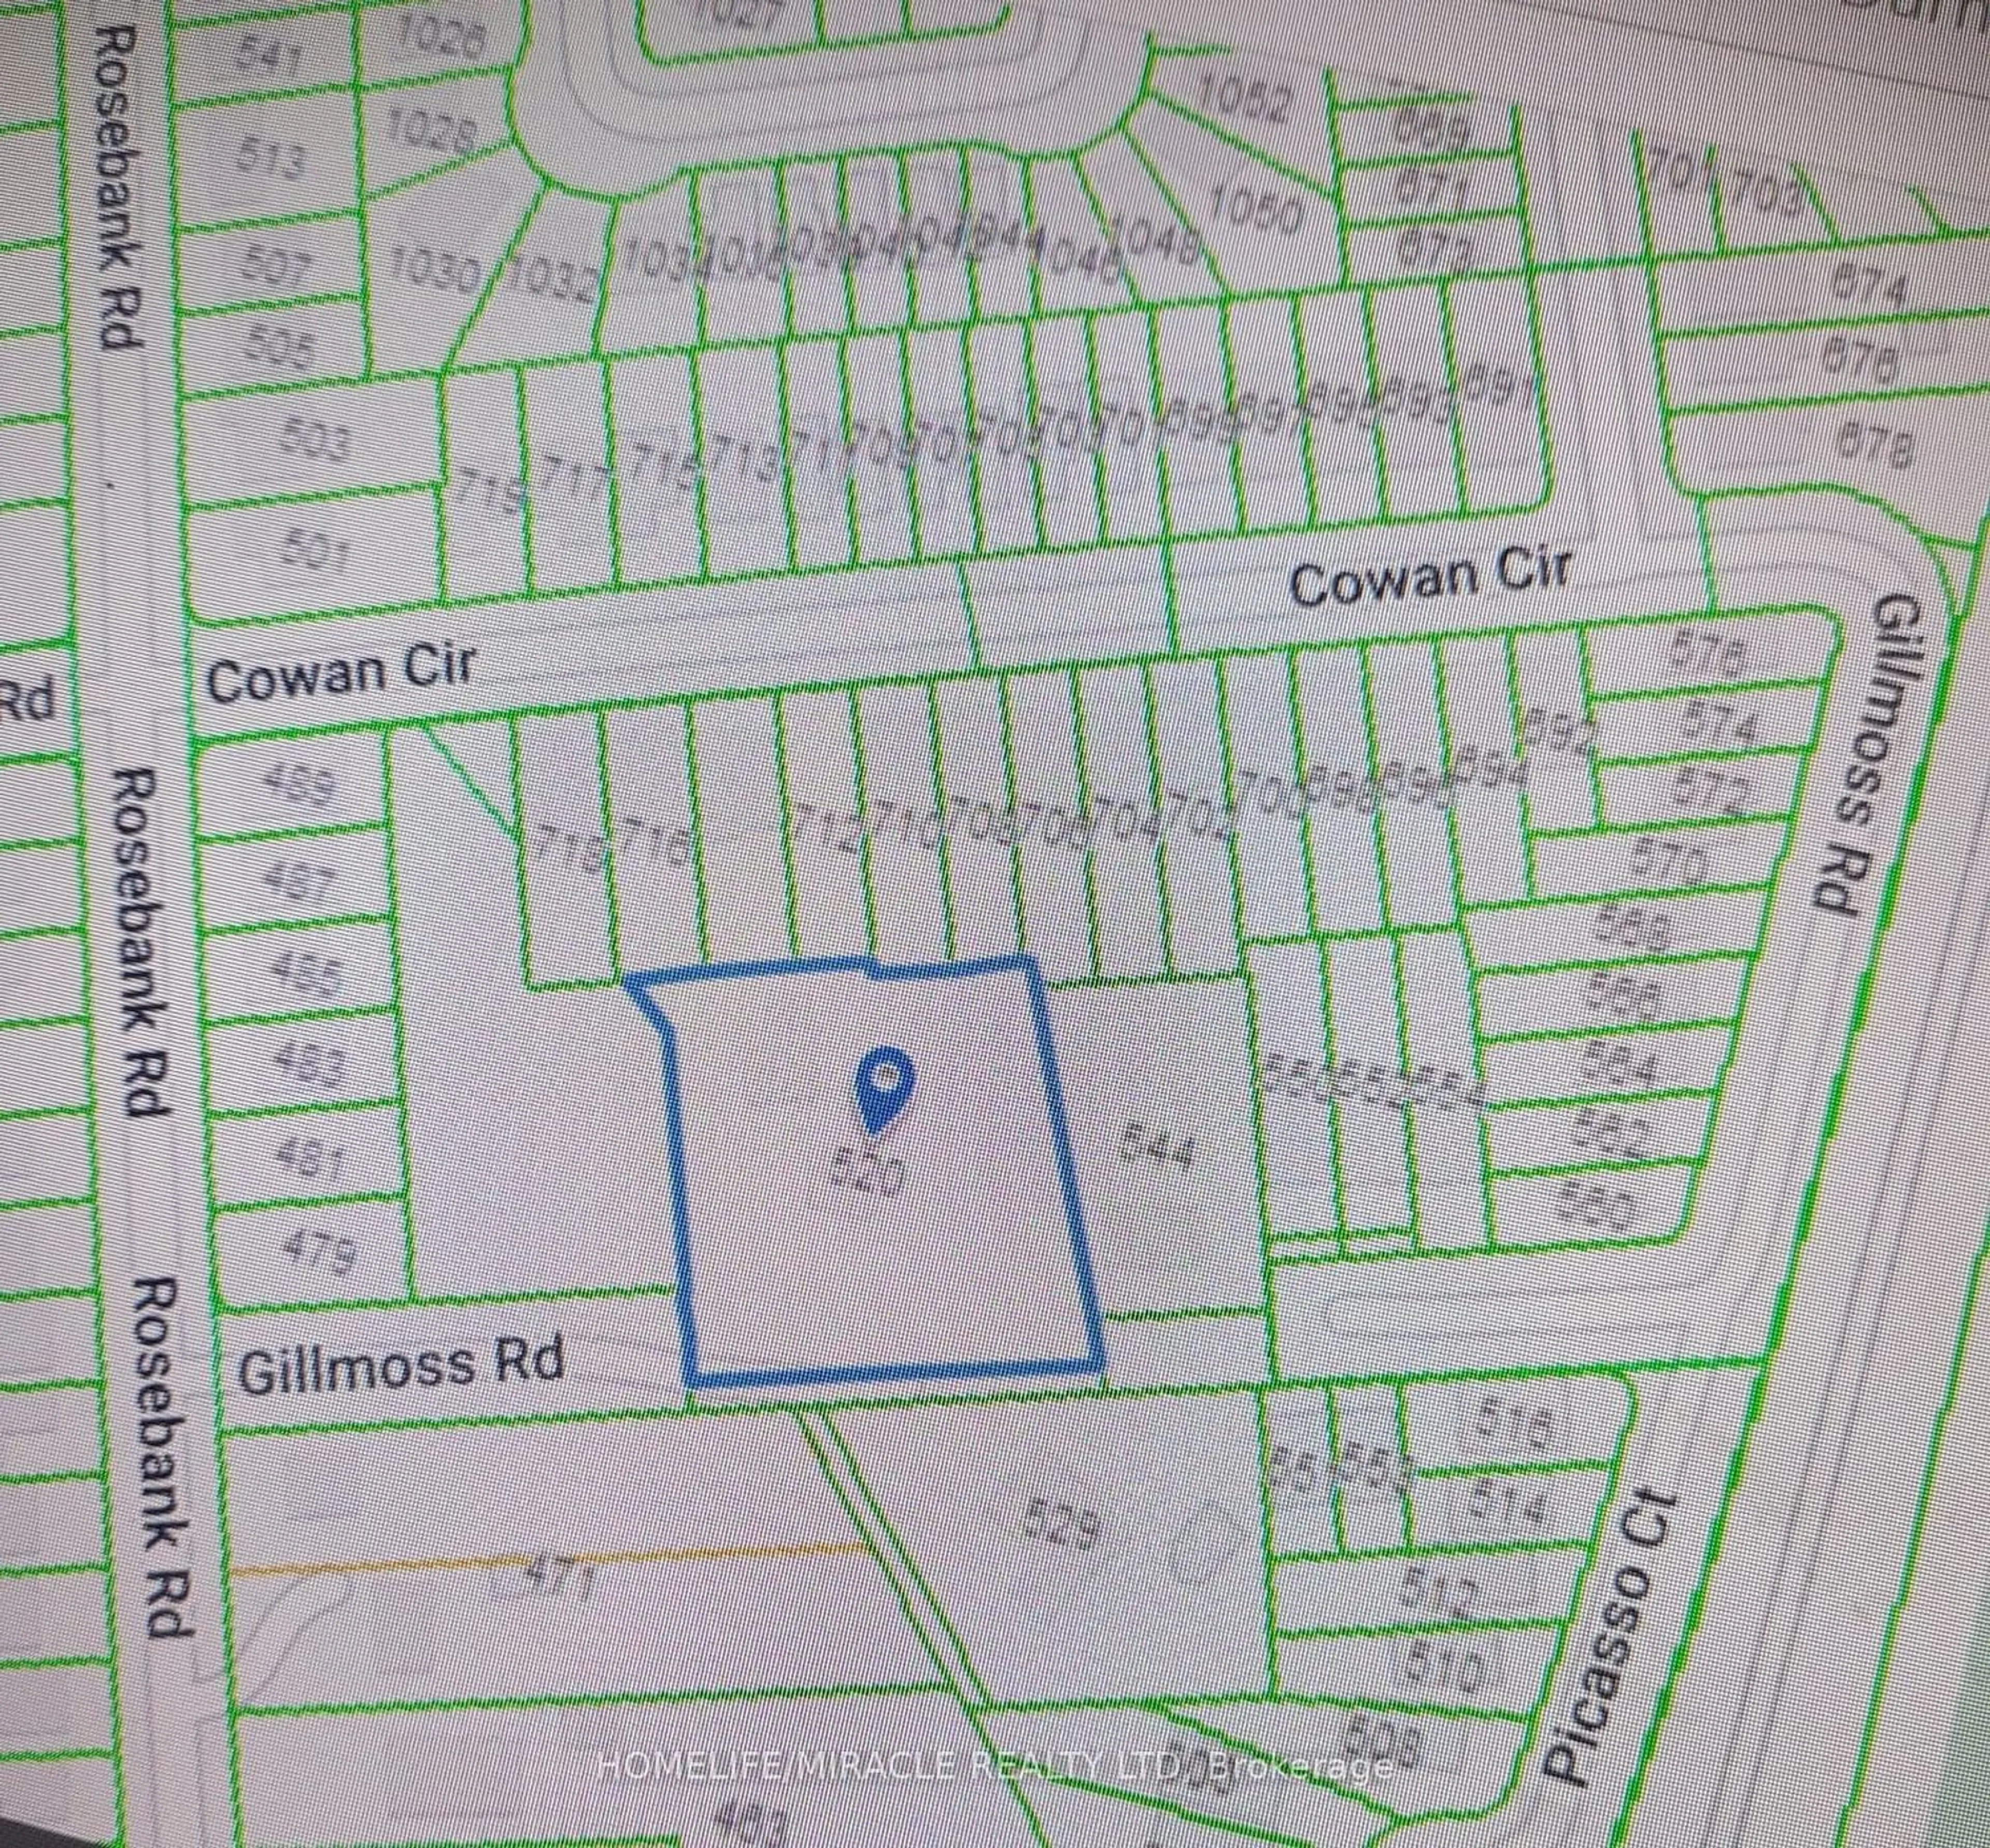 Picture of a map for 520 Gillmoss Rd, Pickering Ontario L1W 3J4